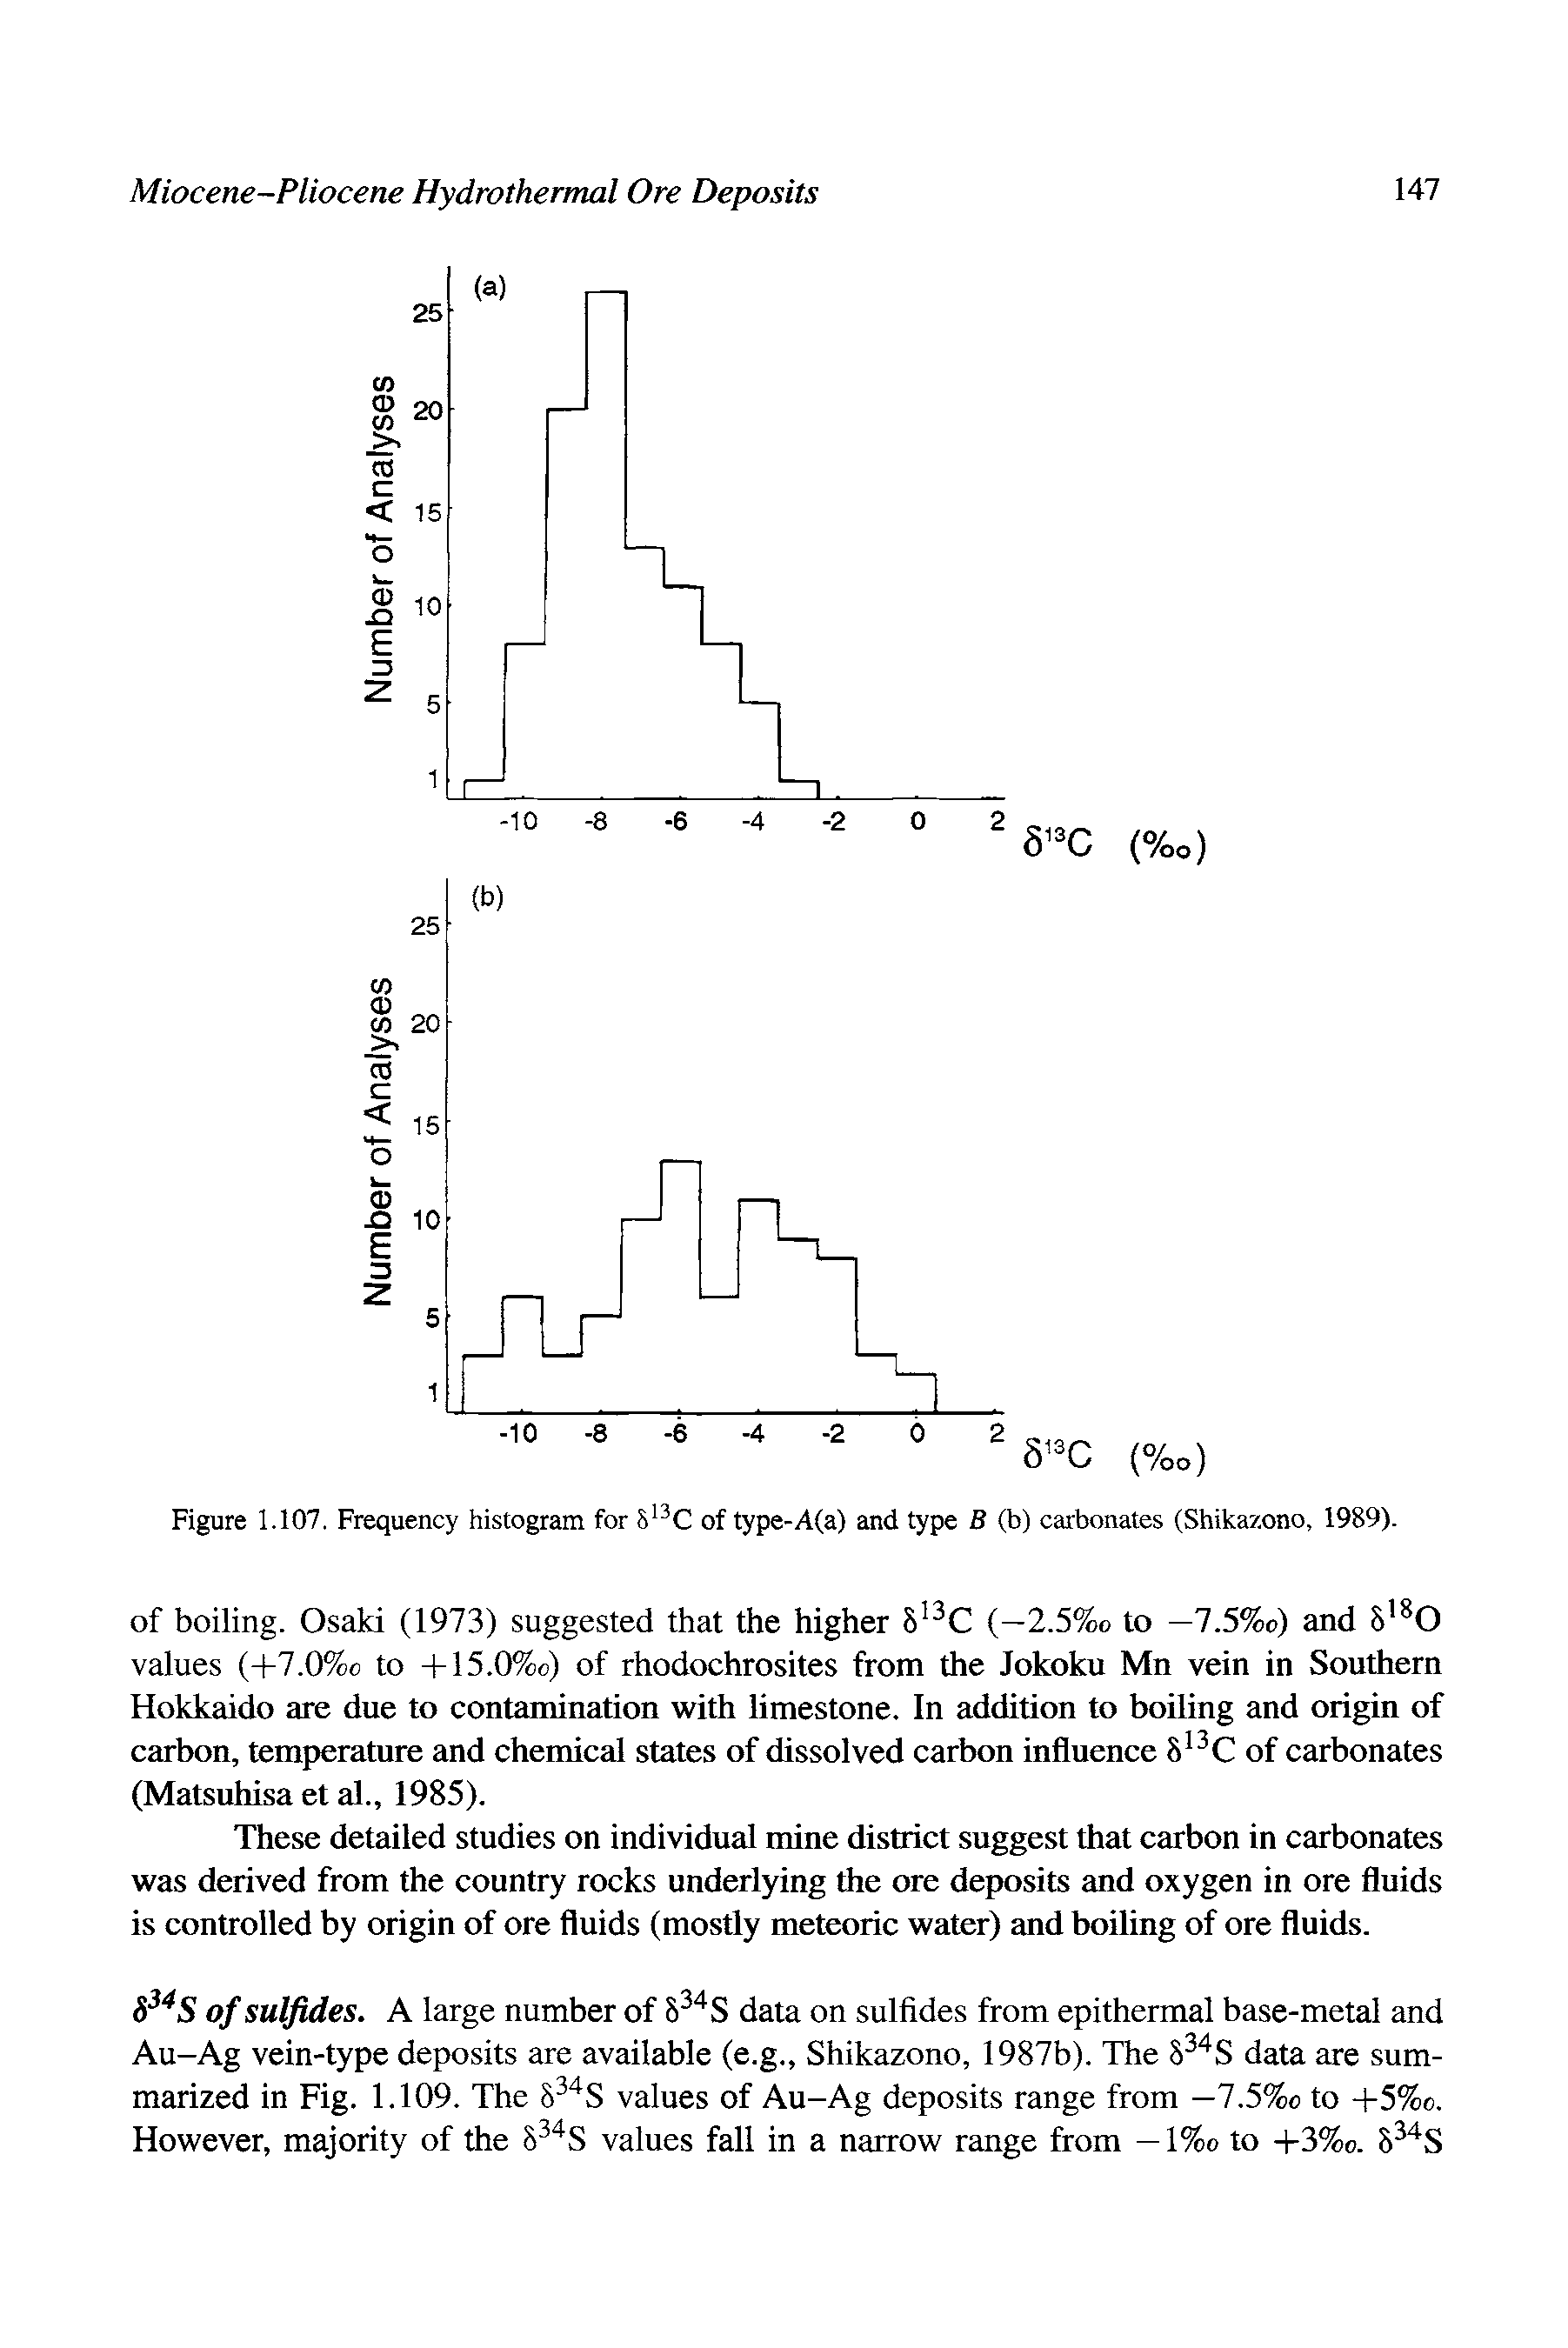 Figure 1.107. Frequency histogram for S C of type-A(a) and type B (b) carbonates (Shikaz.ono, 1989).